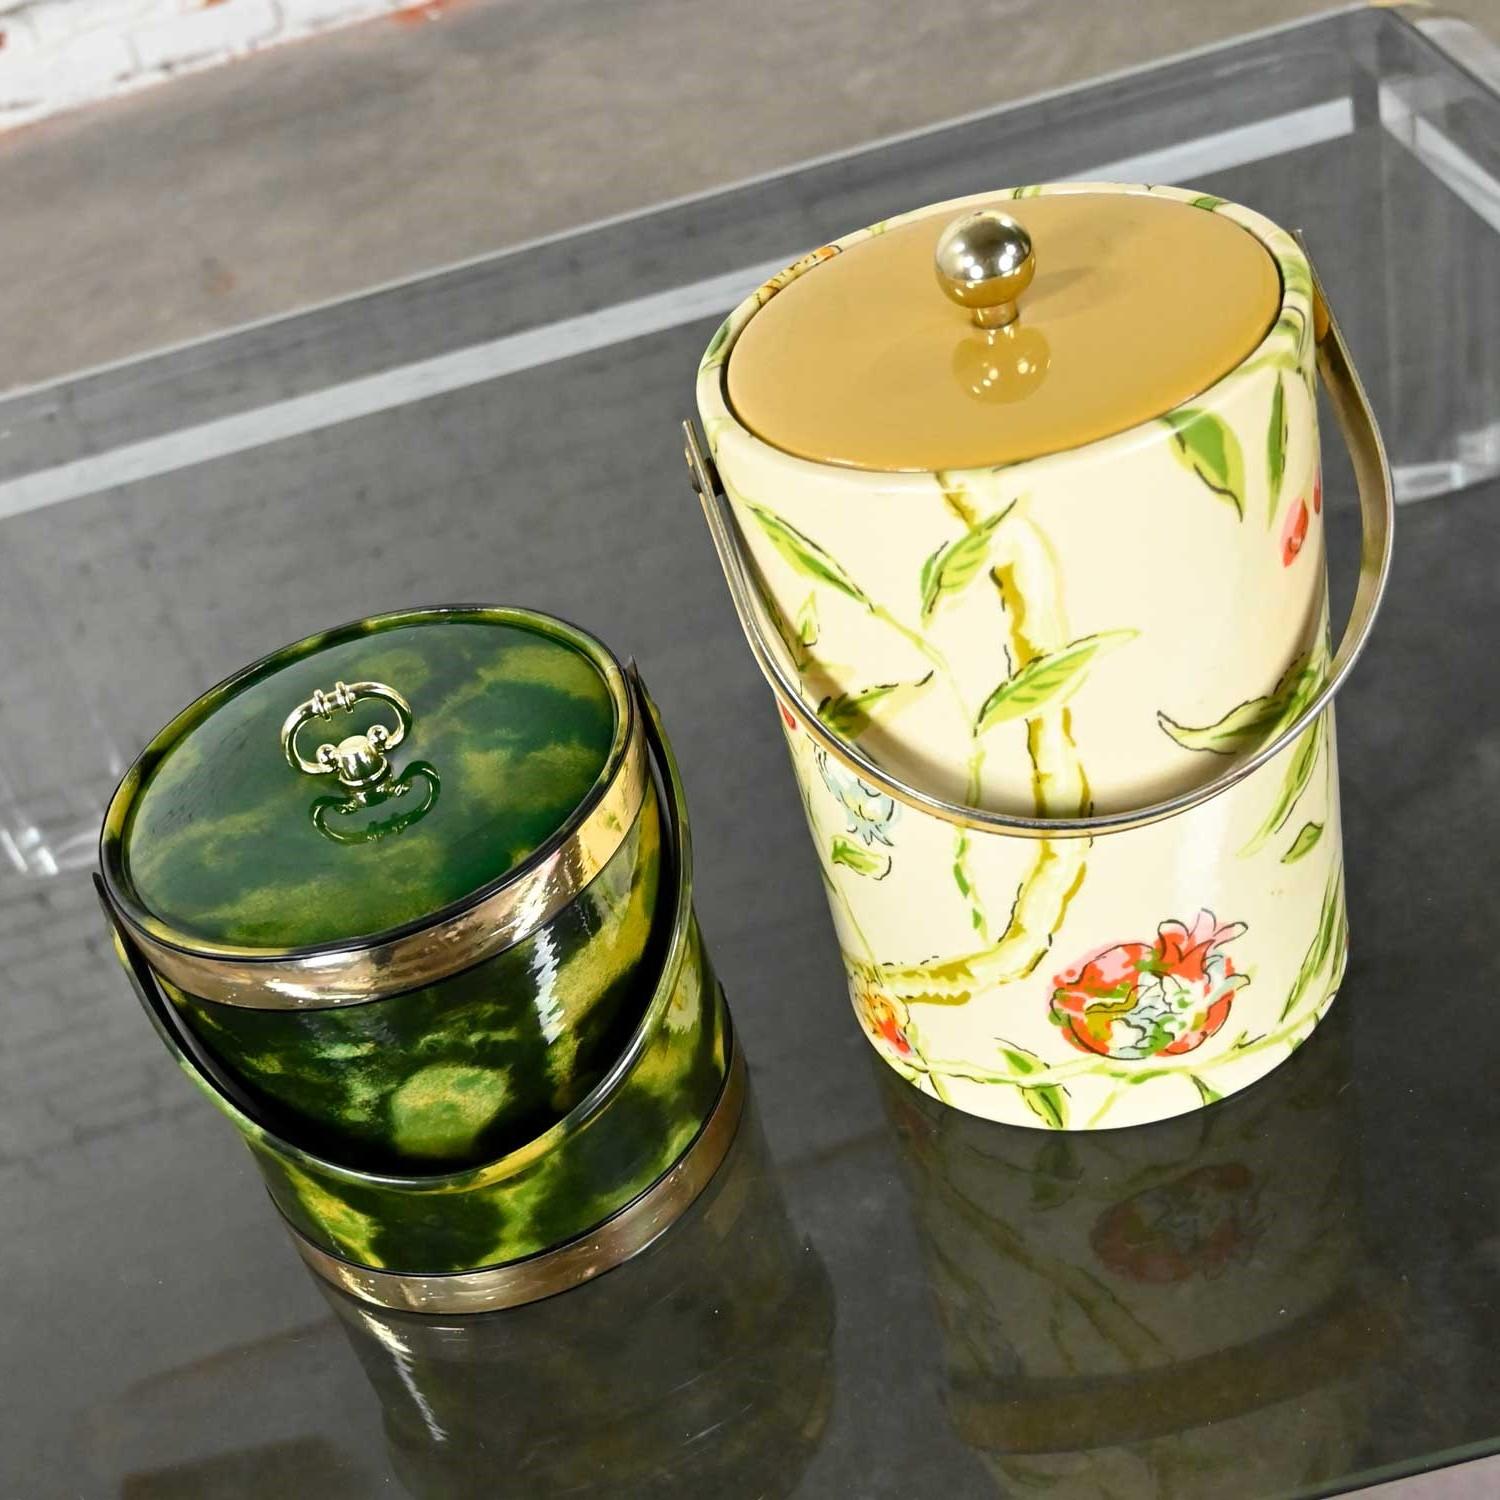 Gorgeous vintage pair of Hollywood Regency ice buckets 1 floral linen-like & vinyl covered fabric bucket & 1 avocado green vinyl bucket with gold trim, both with brass plate knobs. Beautiful condition, keeping in mind that these are vintage and not